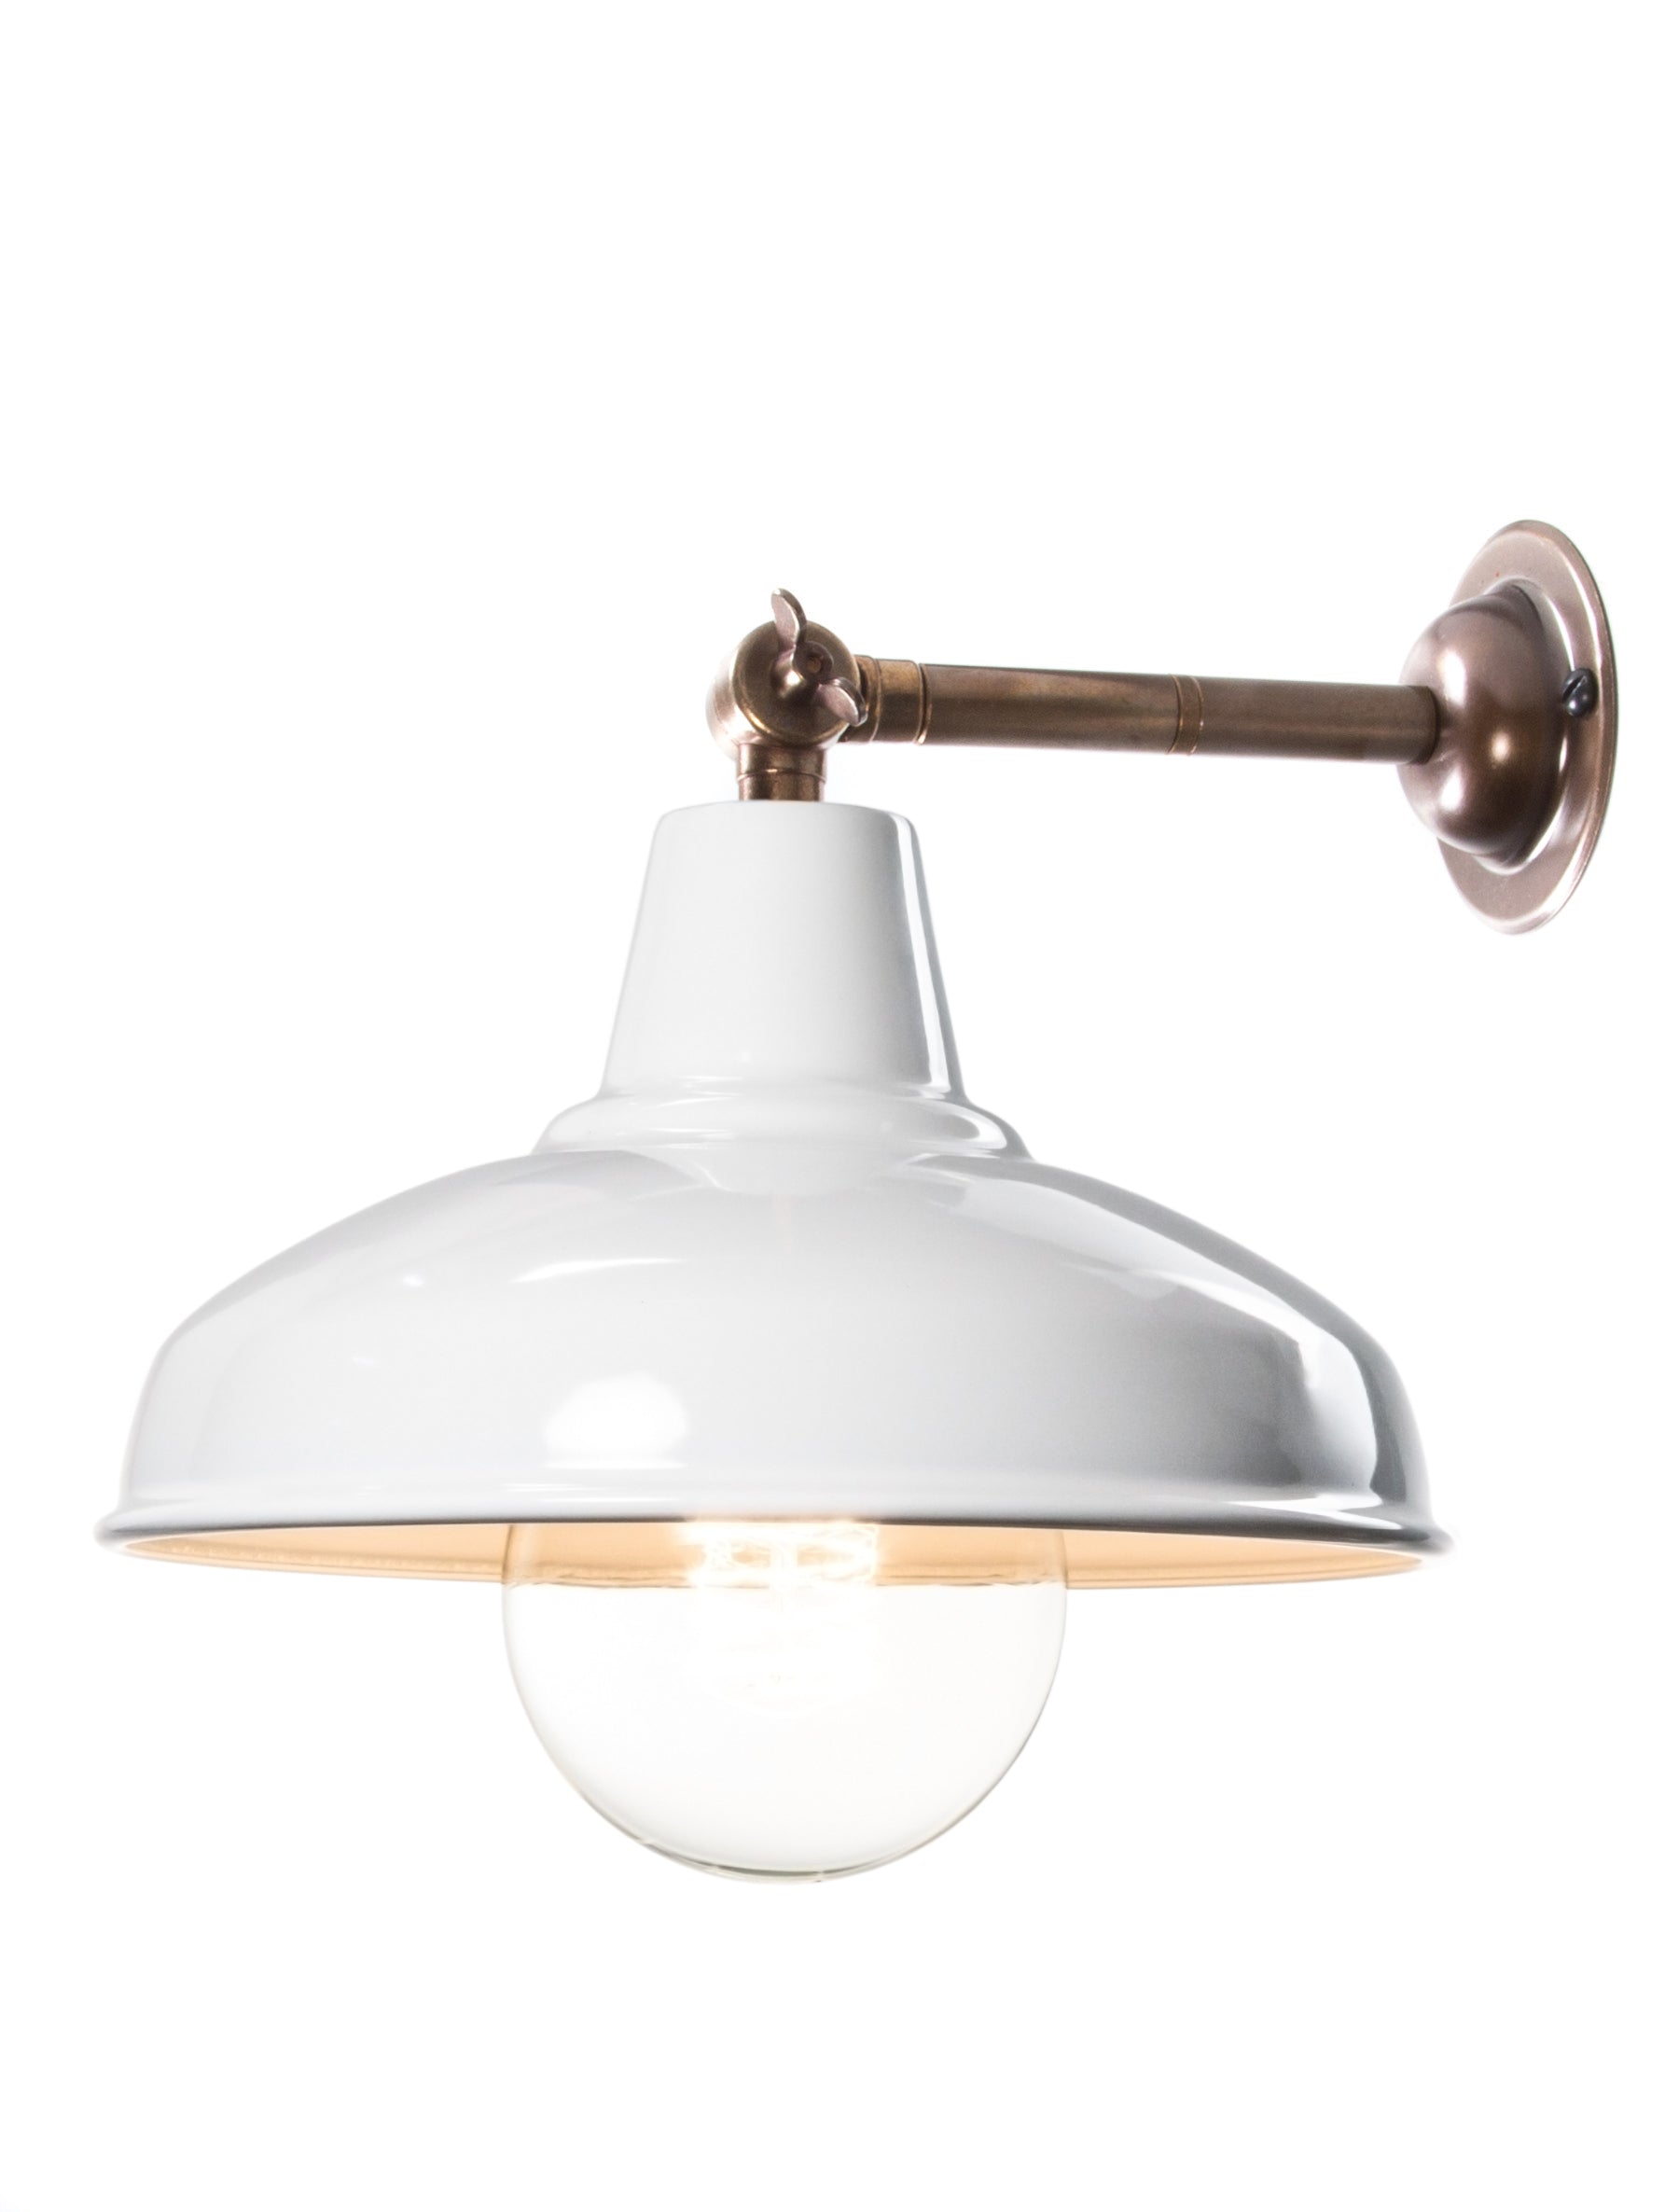 Brass Maria Banjo Wall Light with White Shade | End-Of-Line